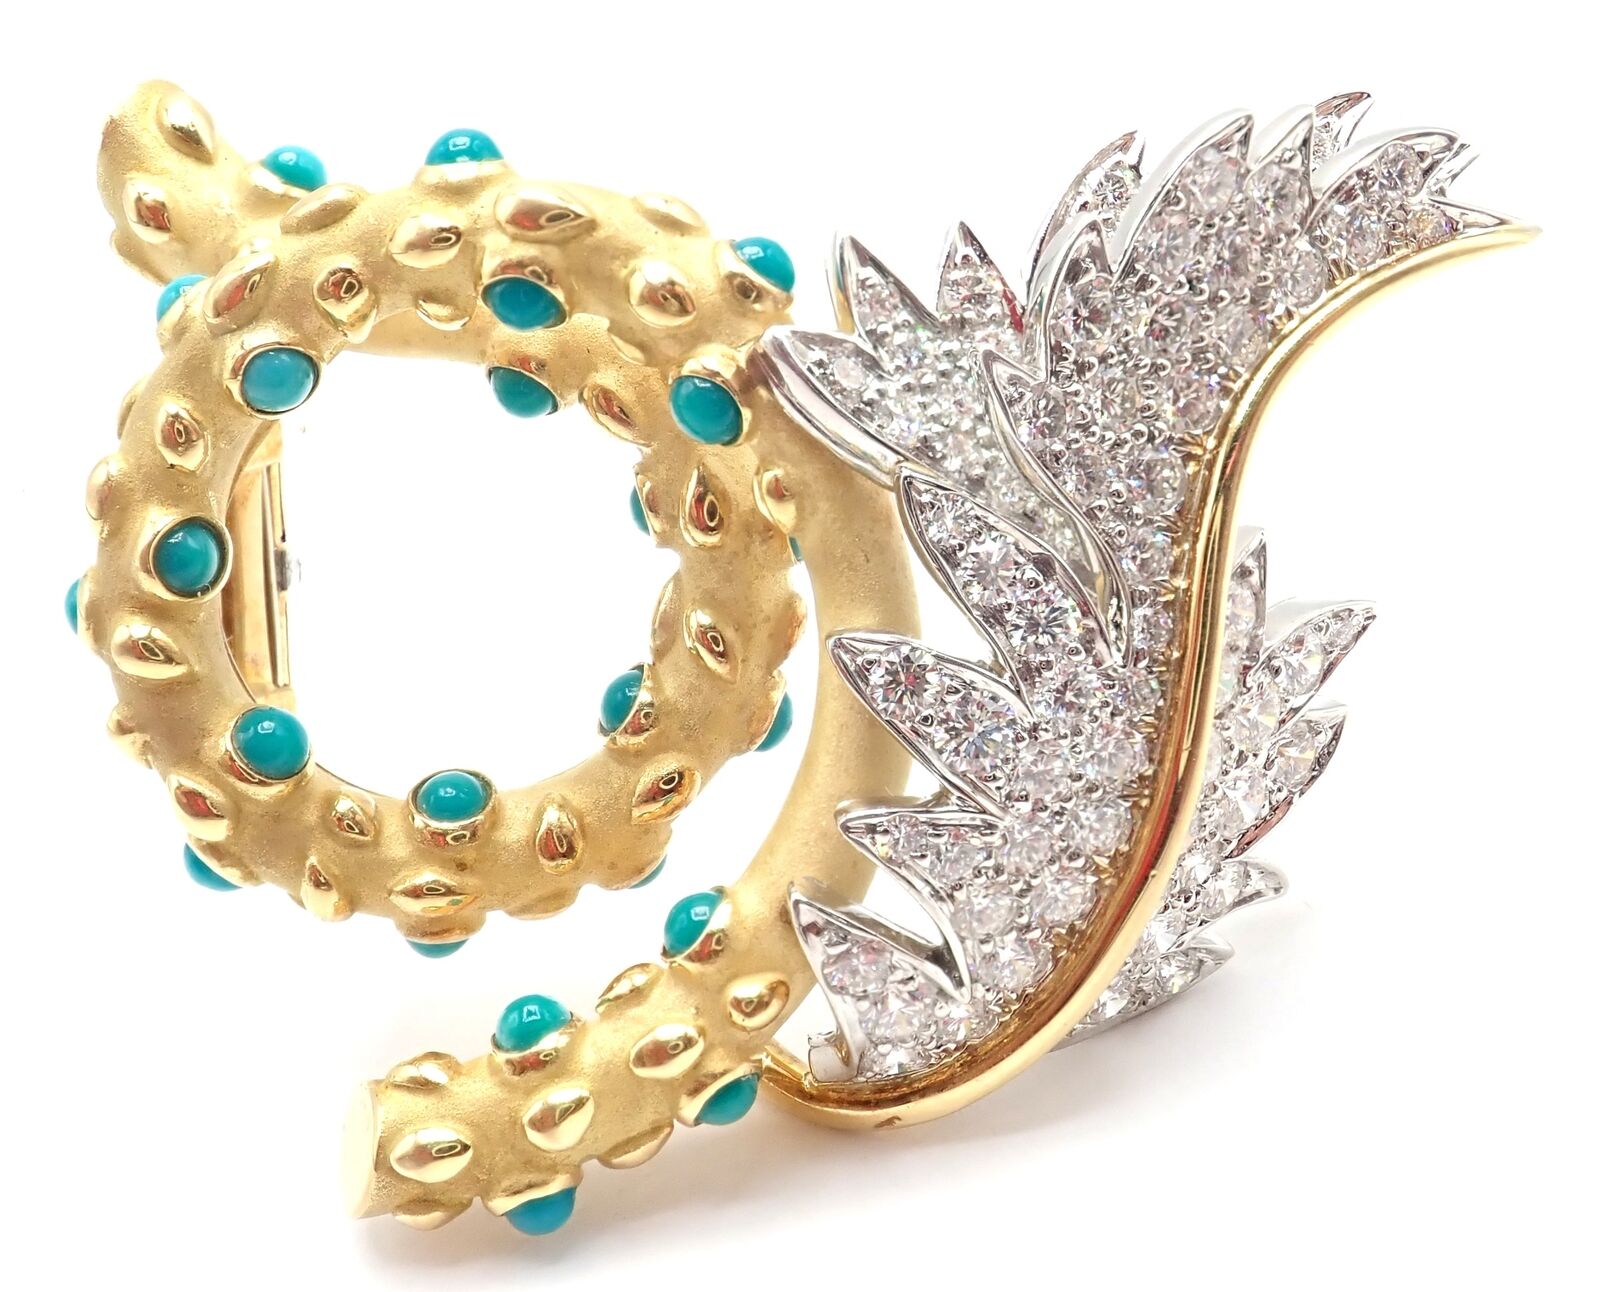 Tiffany & Co Schlumberger 18k Yellow Gold Platinum Diamond Turquoise Pin Brooch | Fortrove